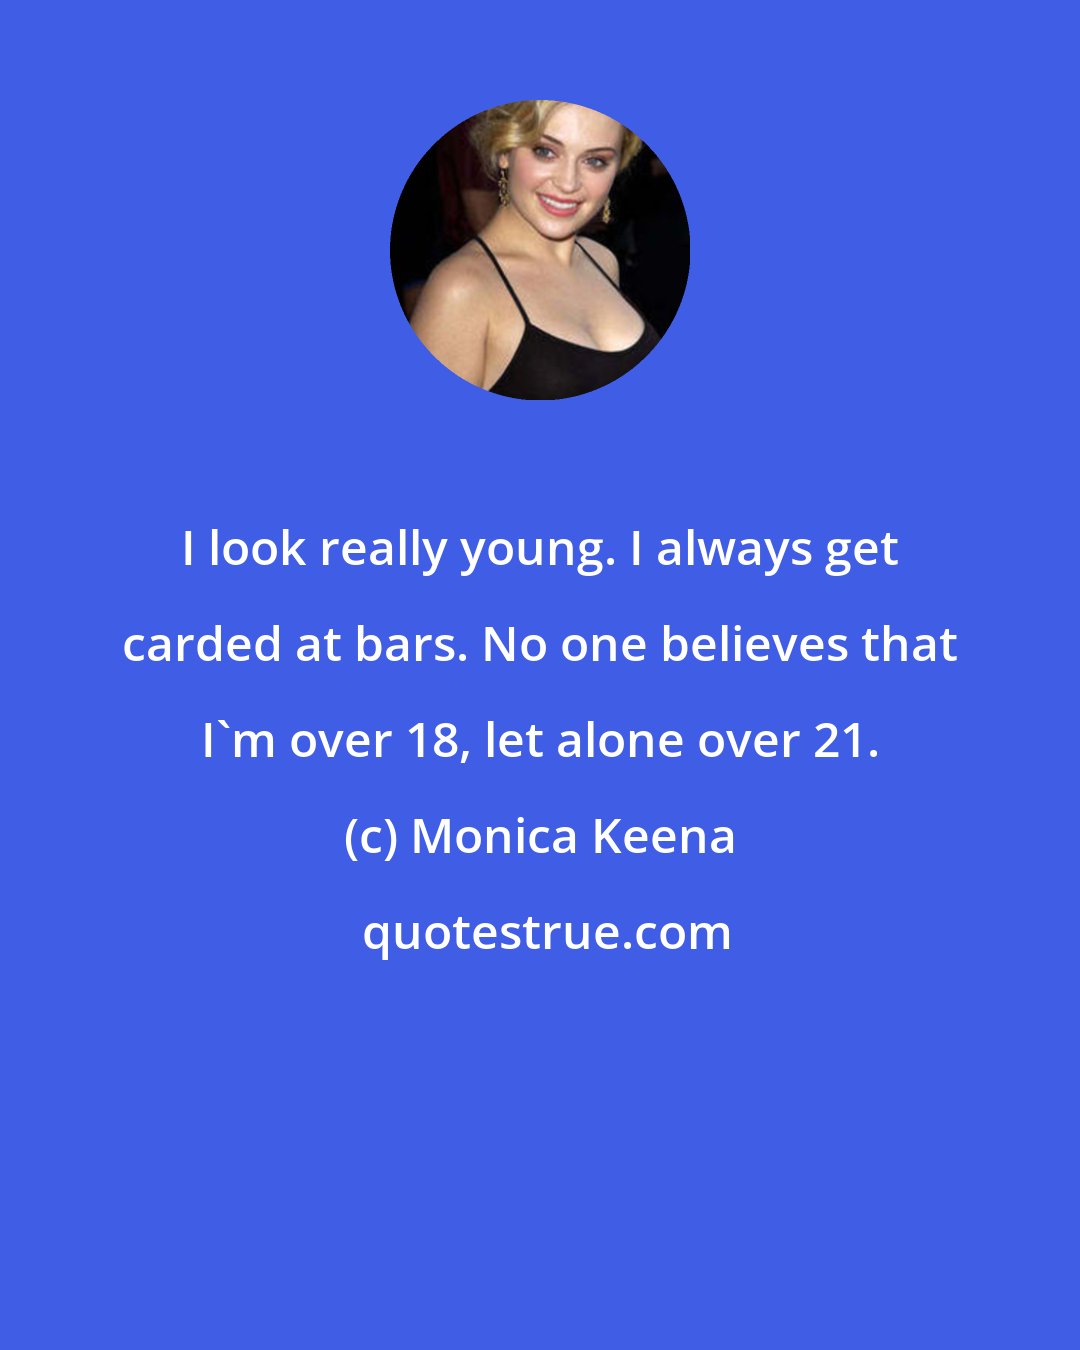 Monica Keena: I look really young. I always get carded at bars. No one believes that I'm over 18, let alone over 21.